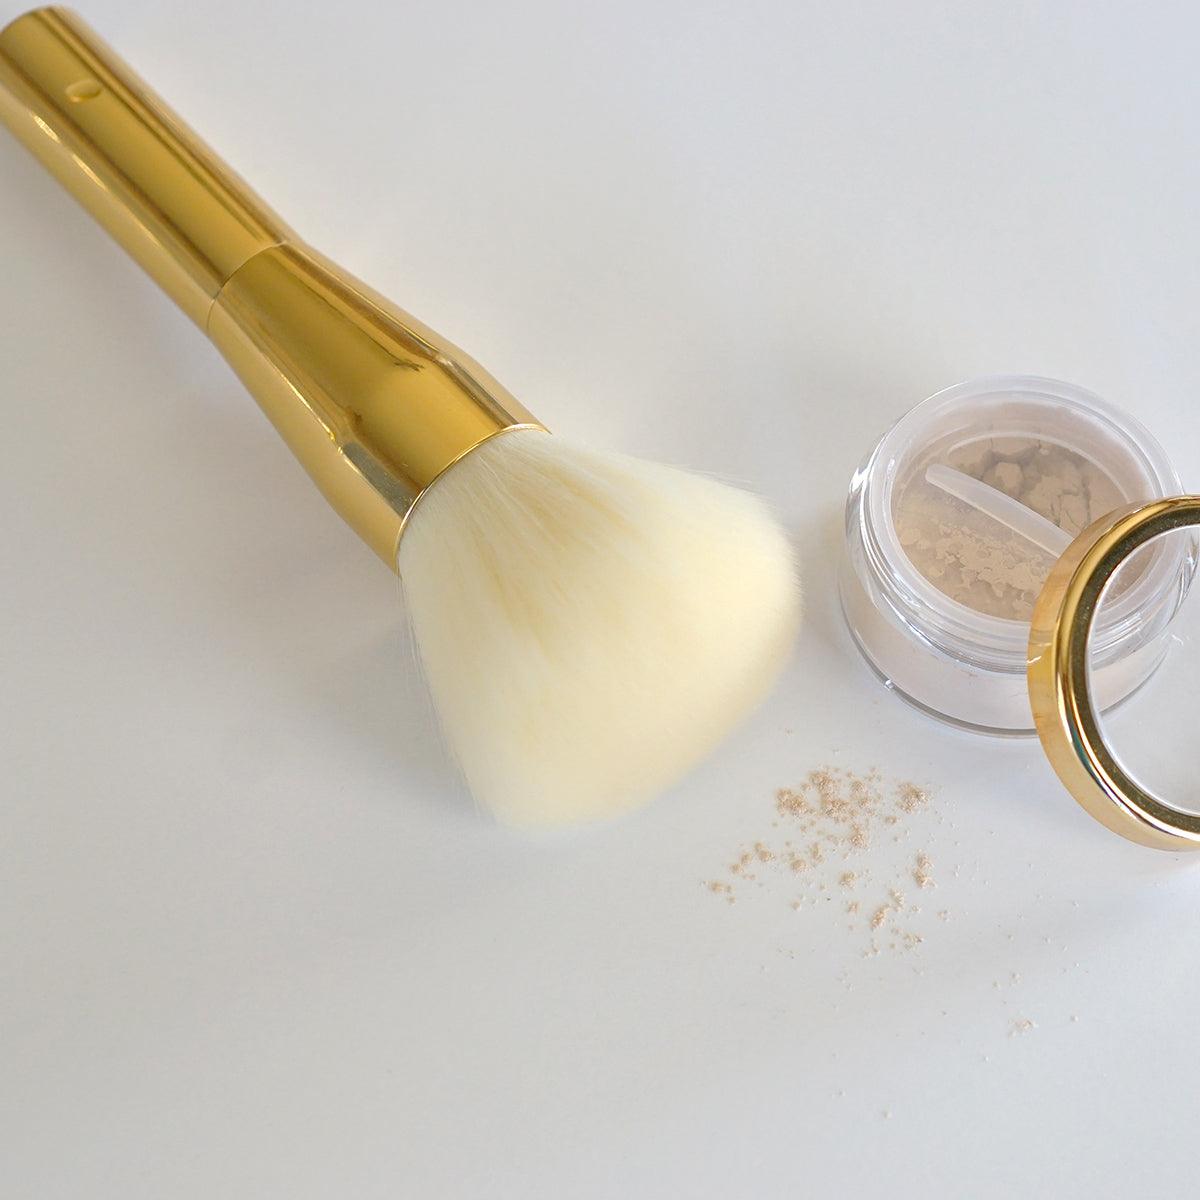 Professional Powder Makeup Brush for Pressed and Loose Makeup - Pharmacist Made